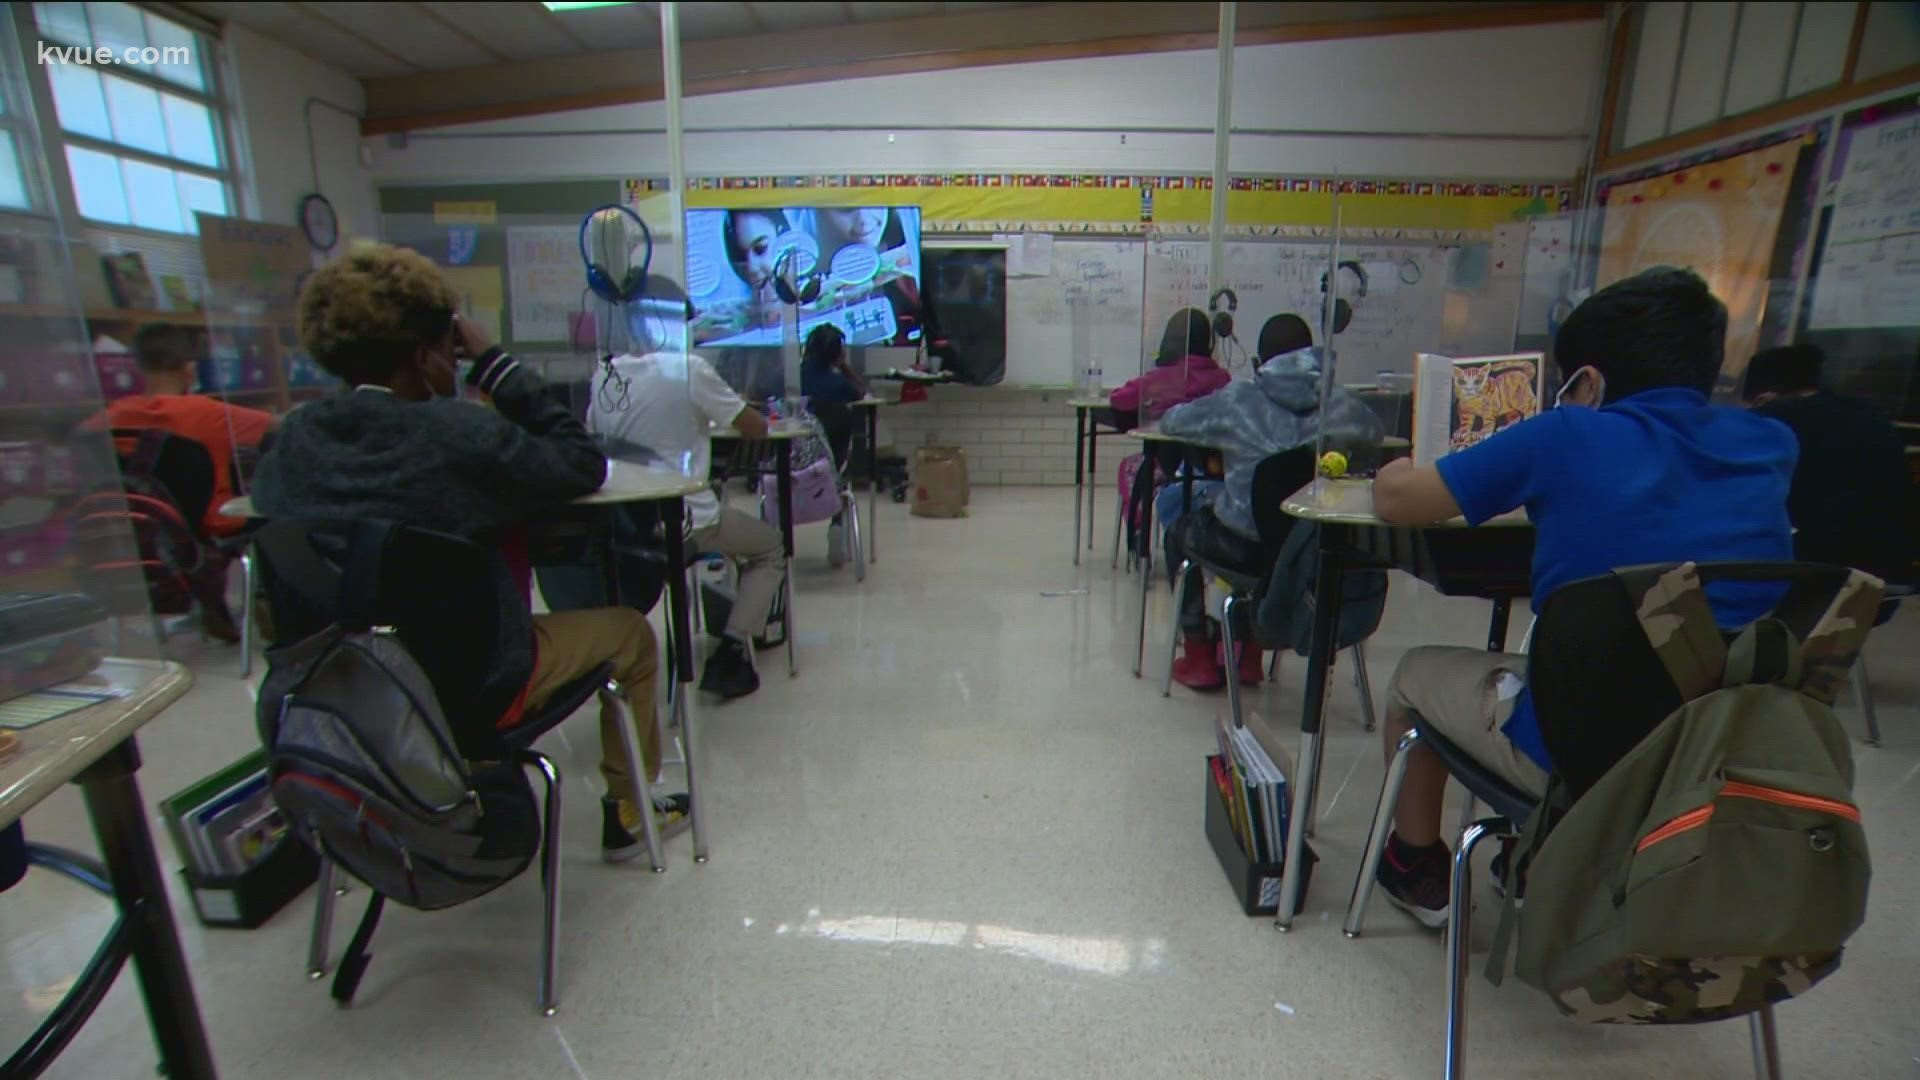 Next week, about 3,000 Austin ISD students who were going to school online will head back to the classroom in the new year.